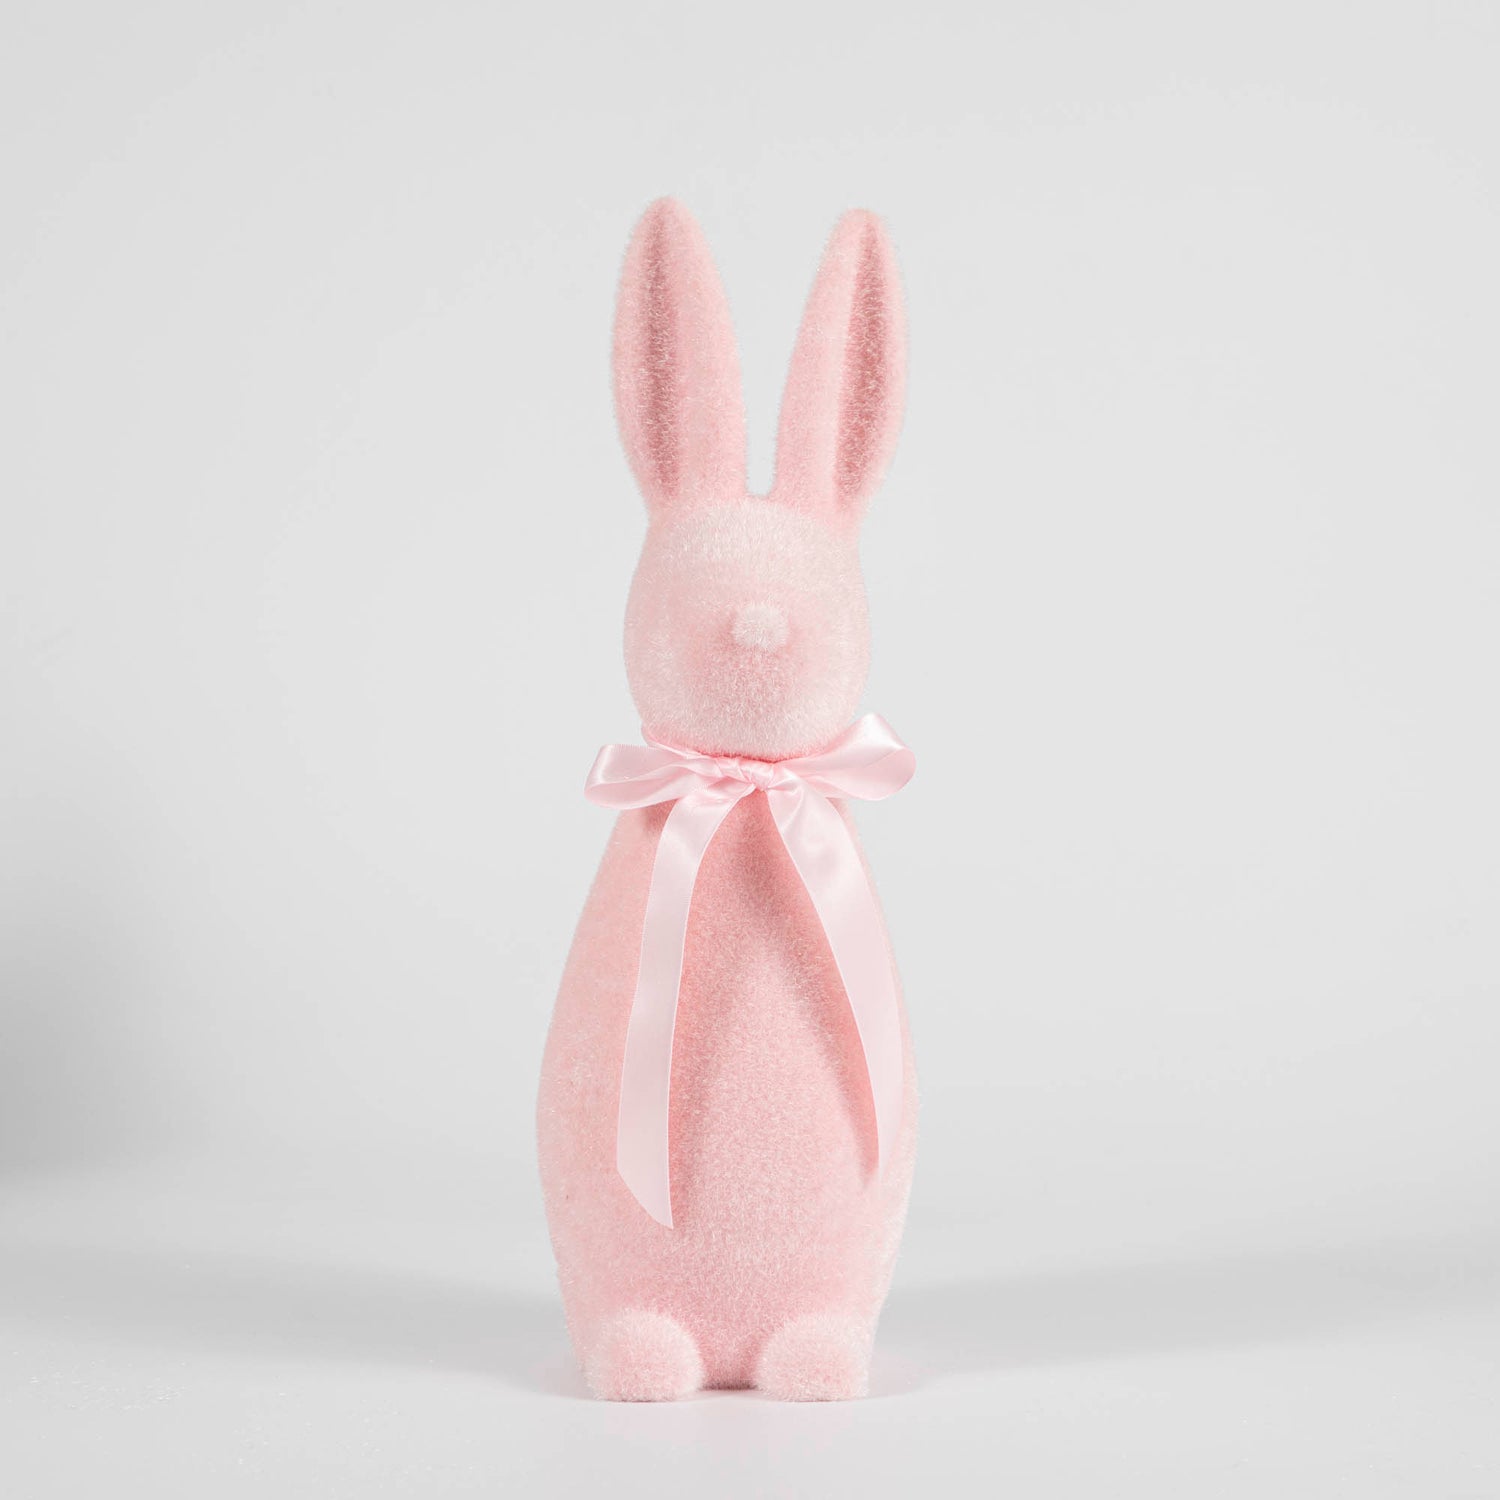 A Medium Flocked Pastel Button Nose Bunny, perfect for spring decorations or Easter, by Glitterville.